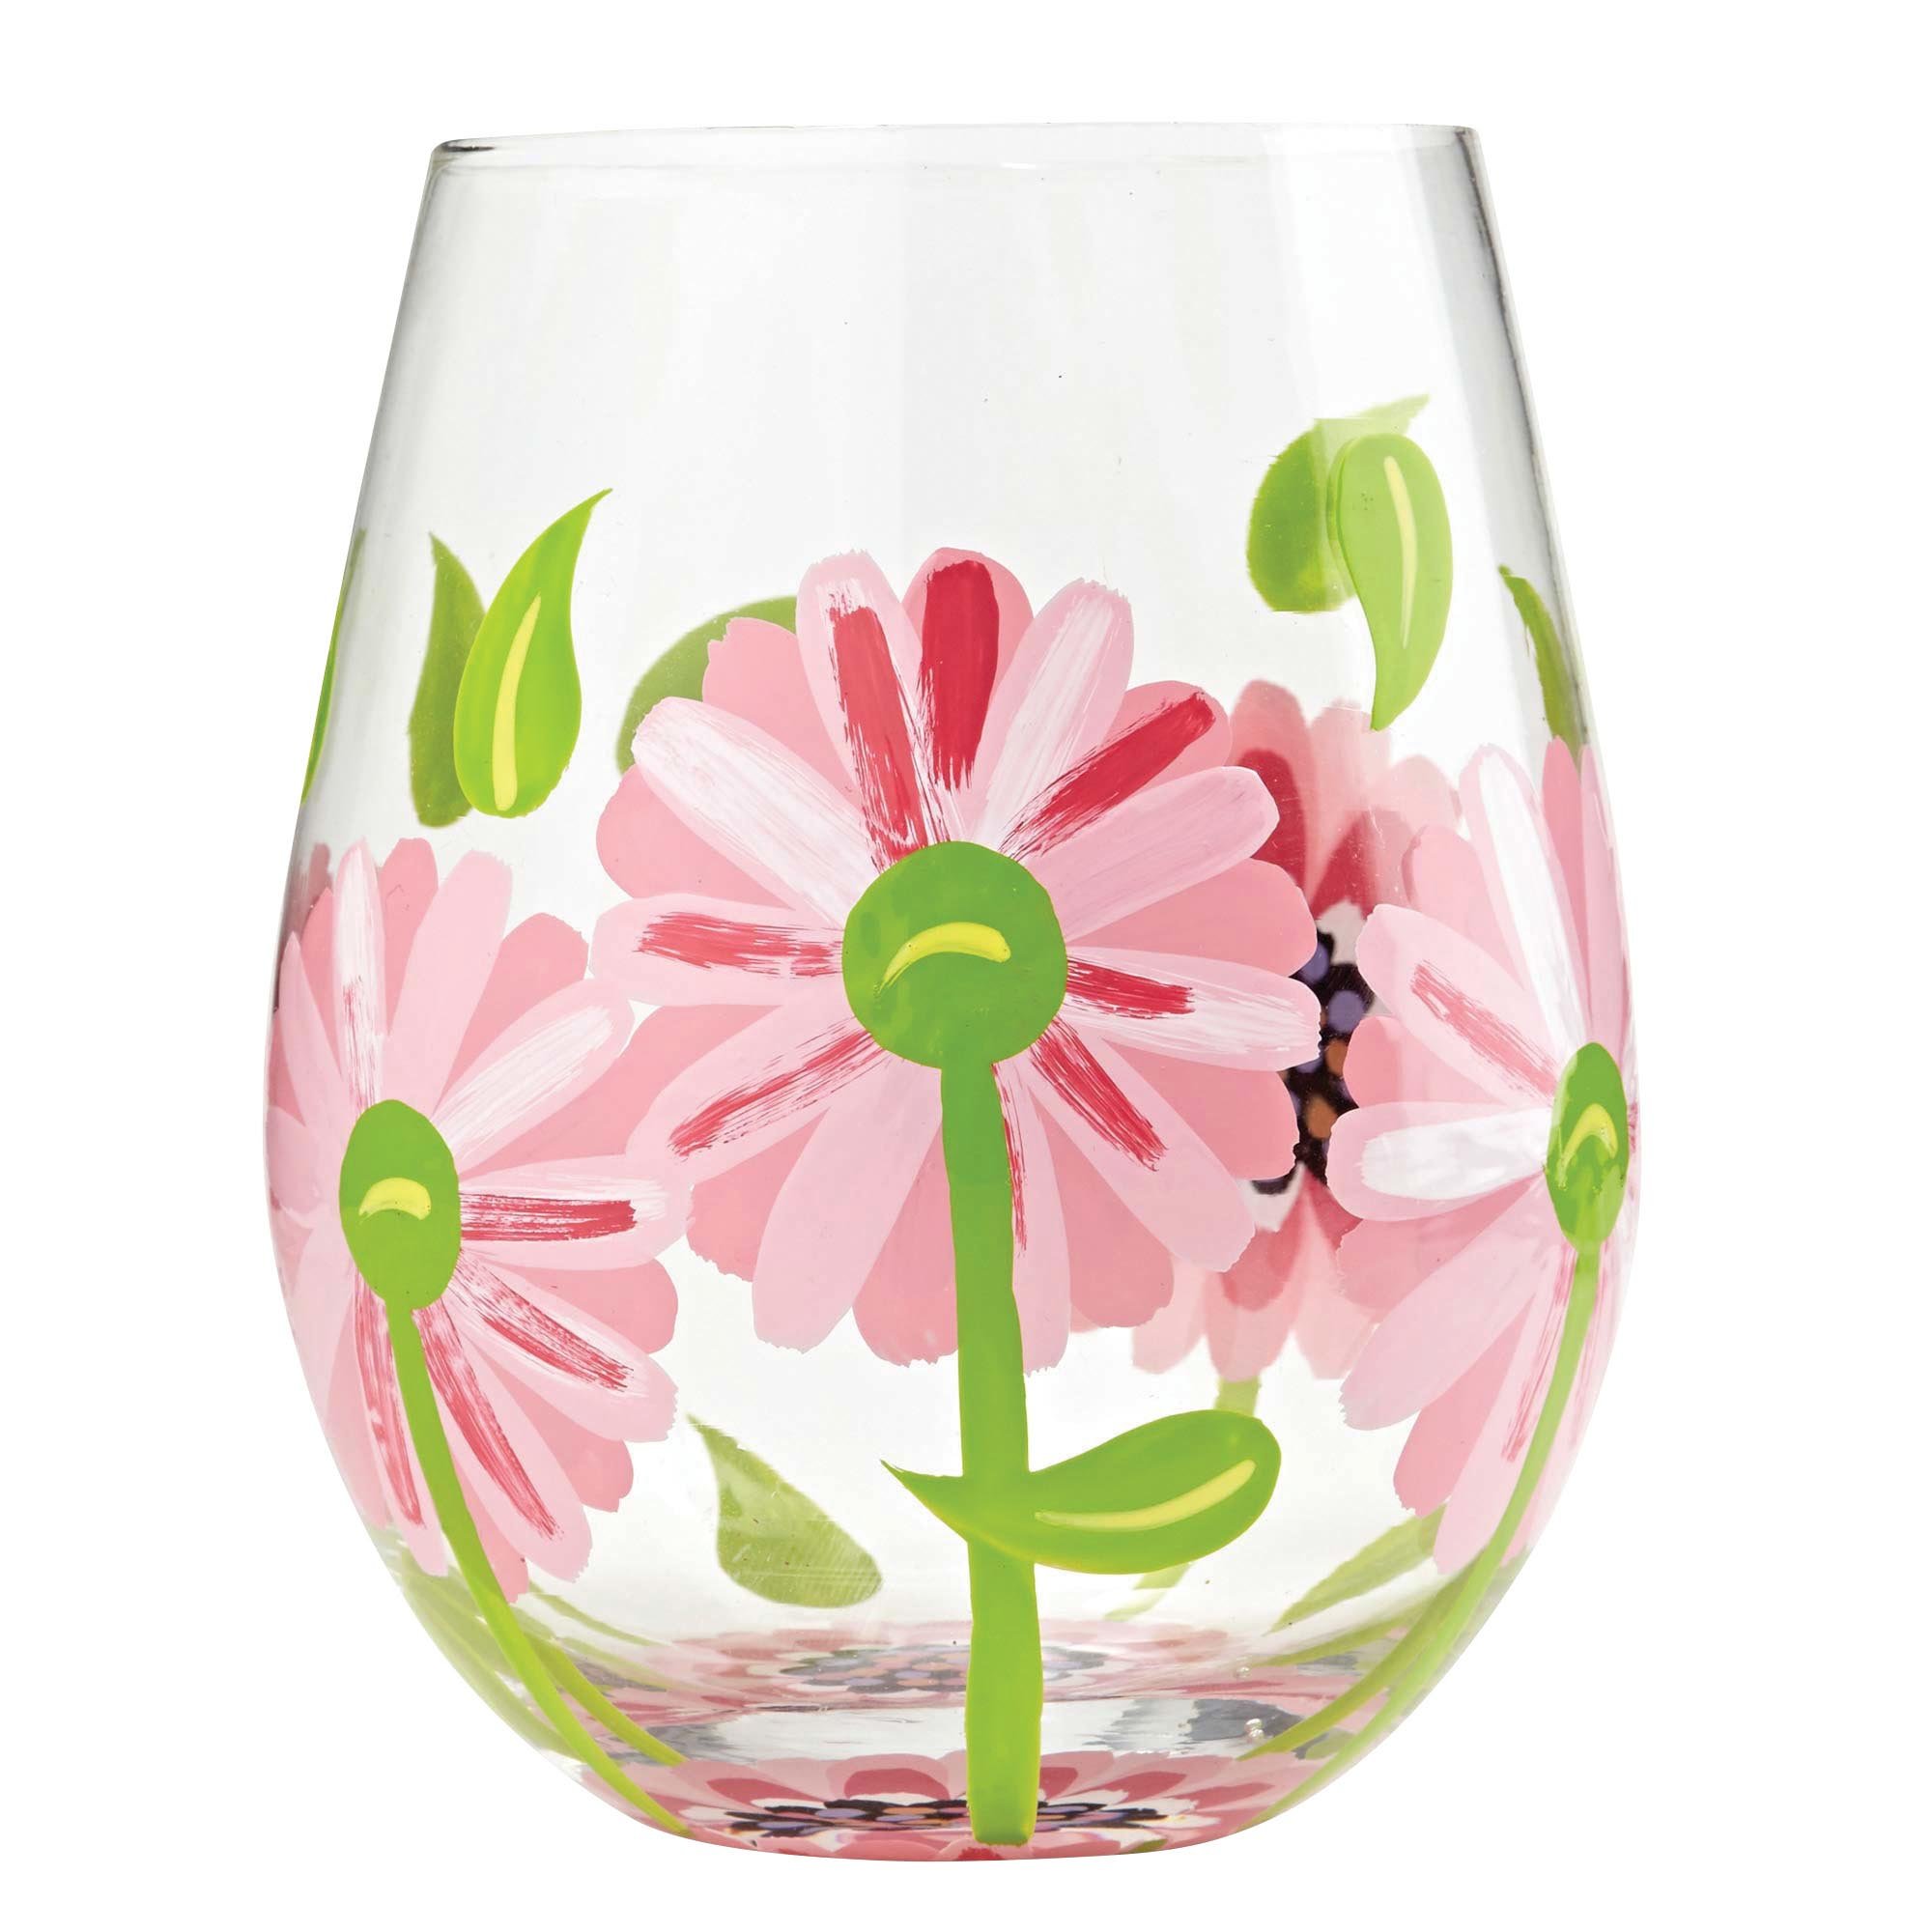 Designs by Lolita “Oops a Daisy” Hand-painted Artisan Stemless Wine Glass, 20 oz.